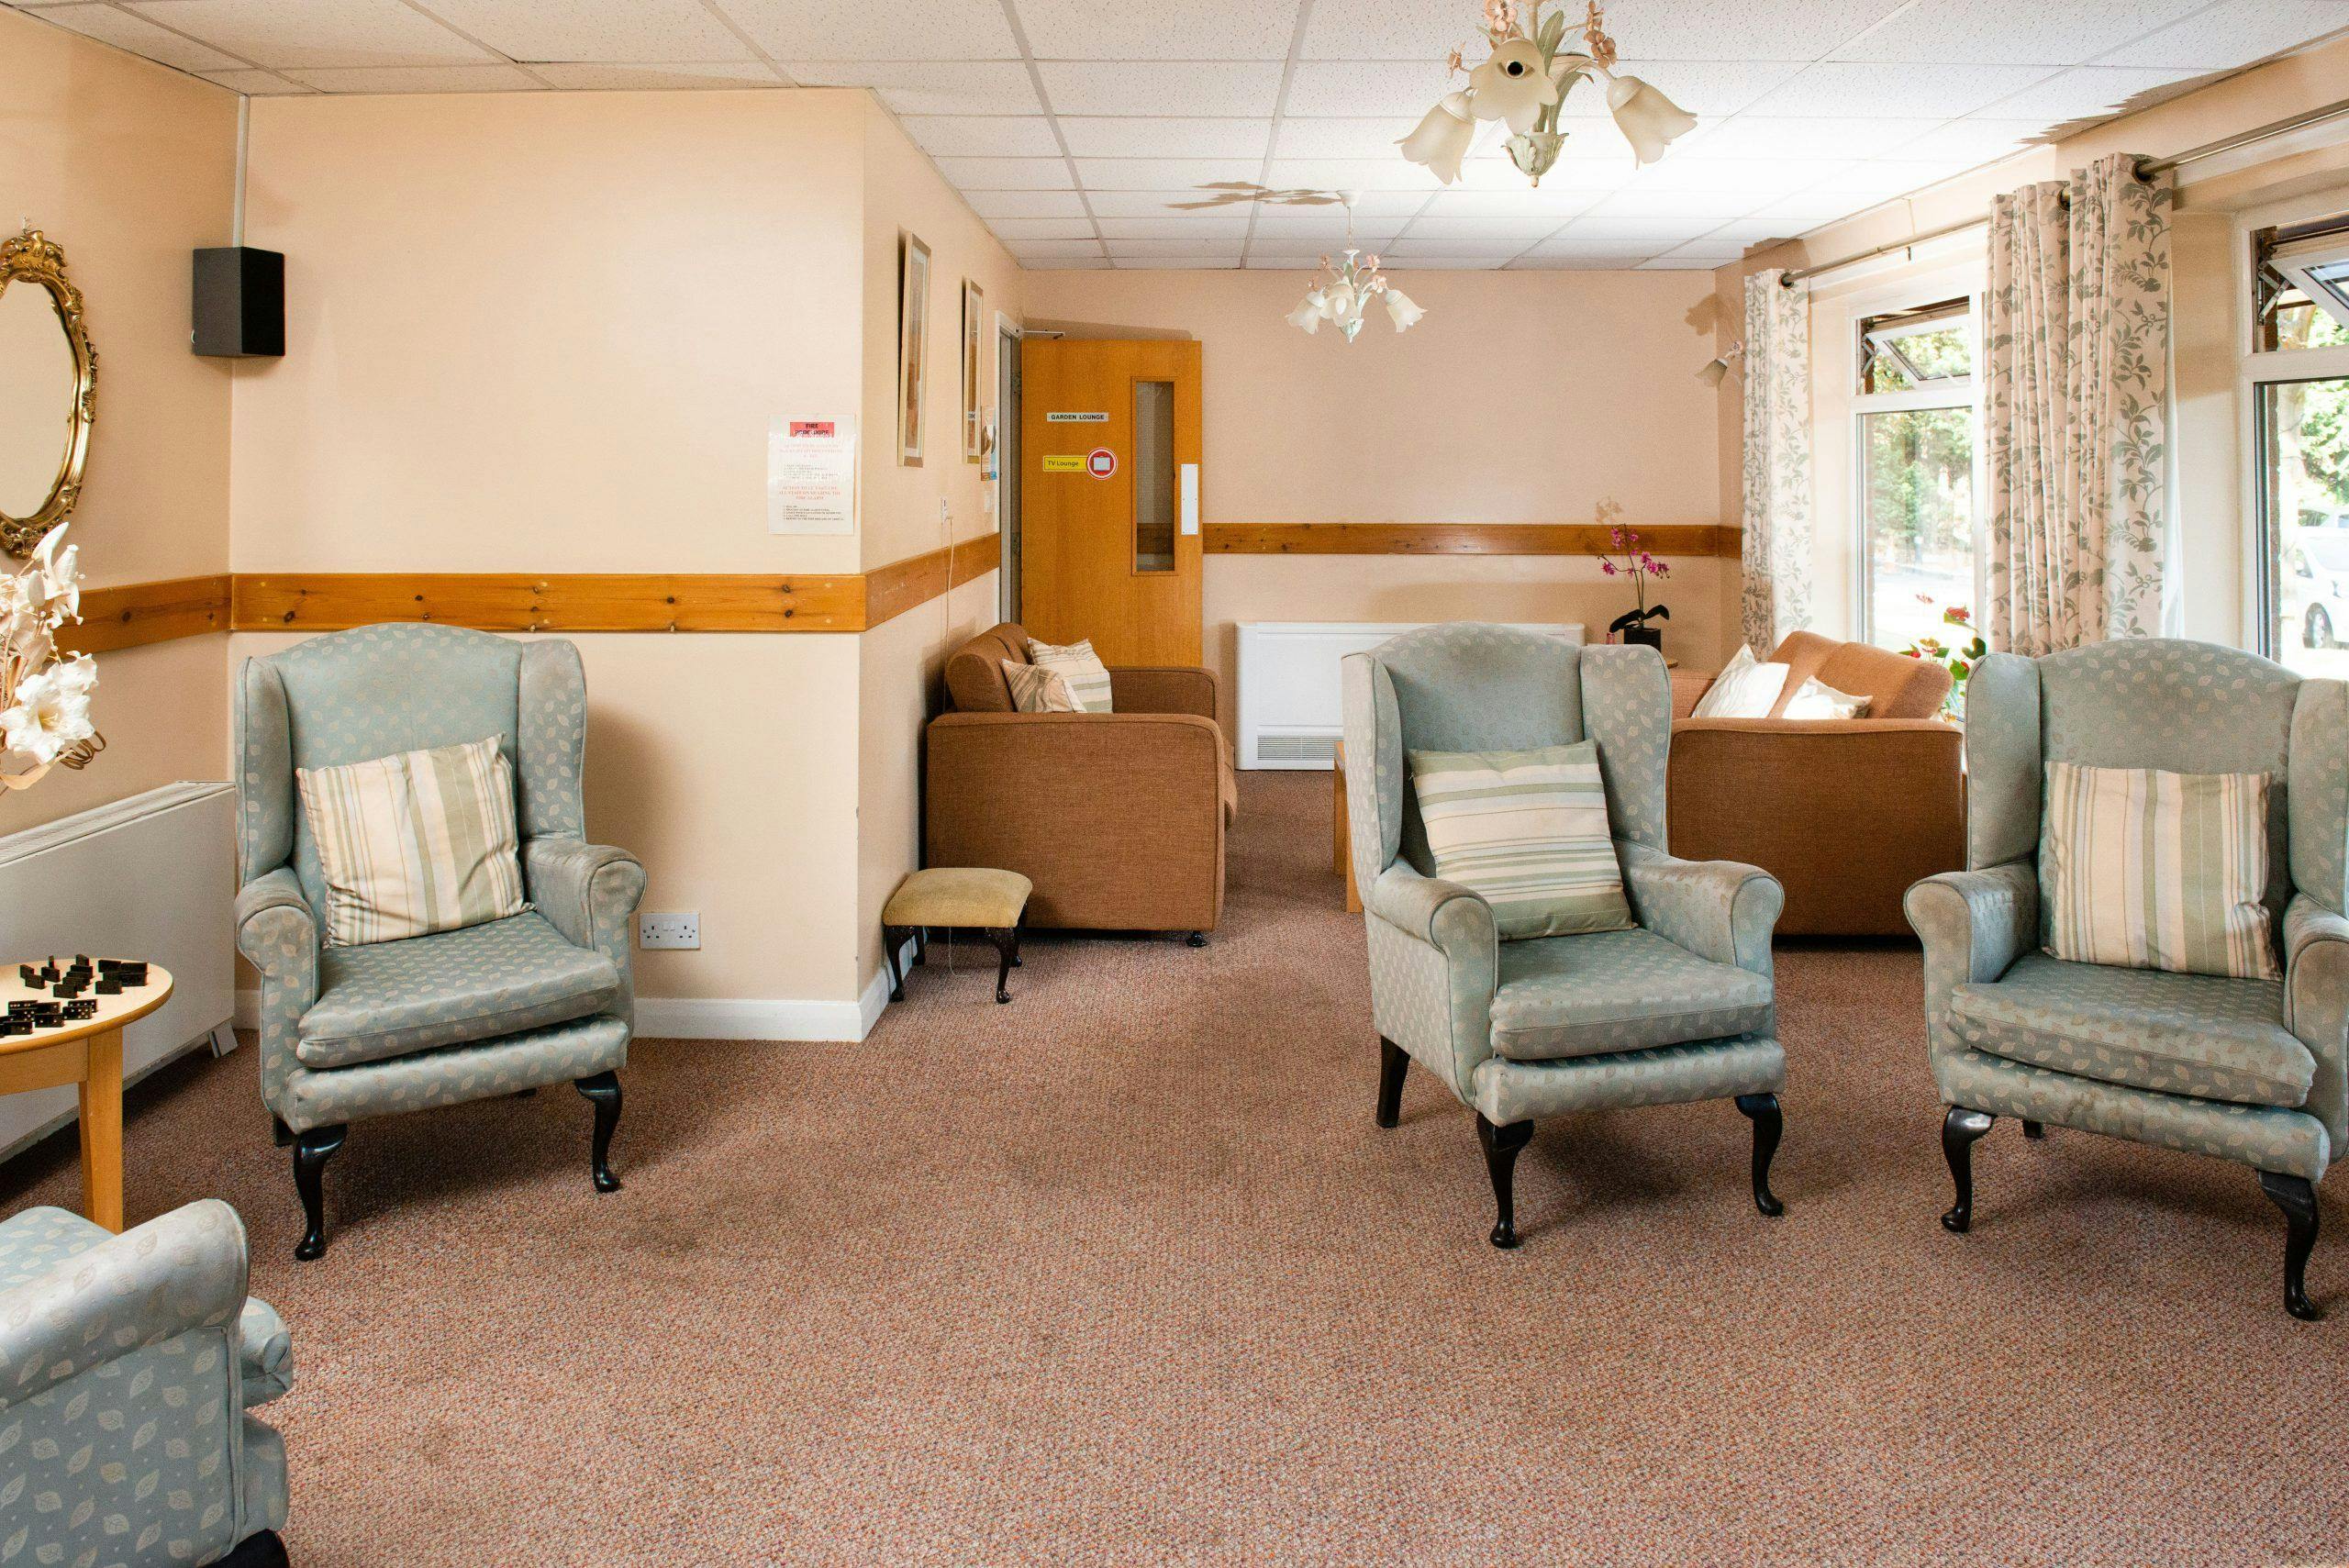 Communal area of Codnor Park Care Home in Ripley, Derbyshire